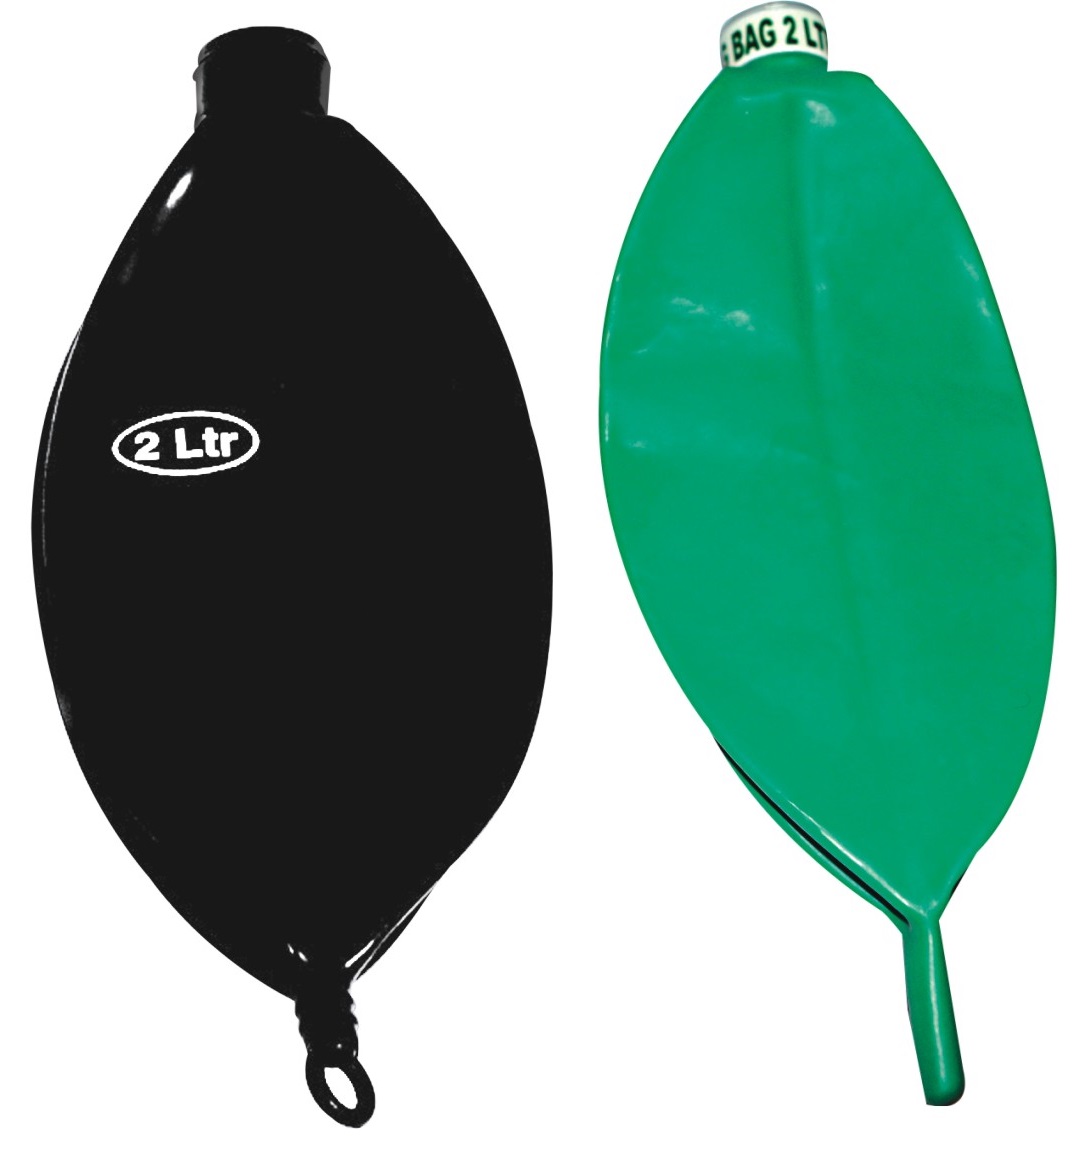 Breathing Bag/Reservoir Bags : 1000 ml : Amazon.in: Bags, Wallets and  Luggage